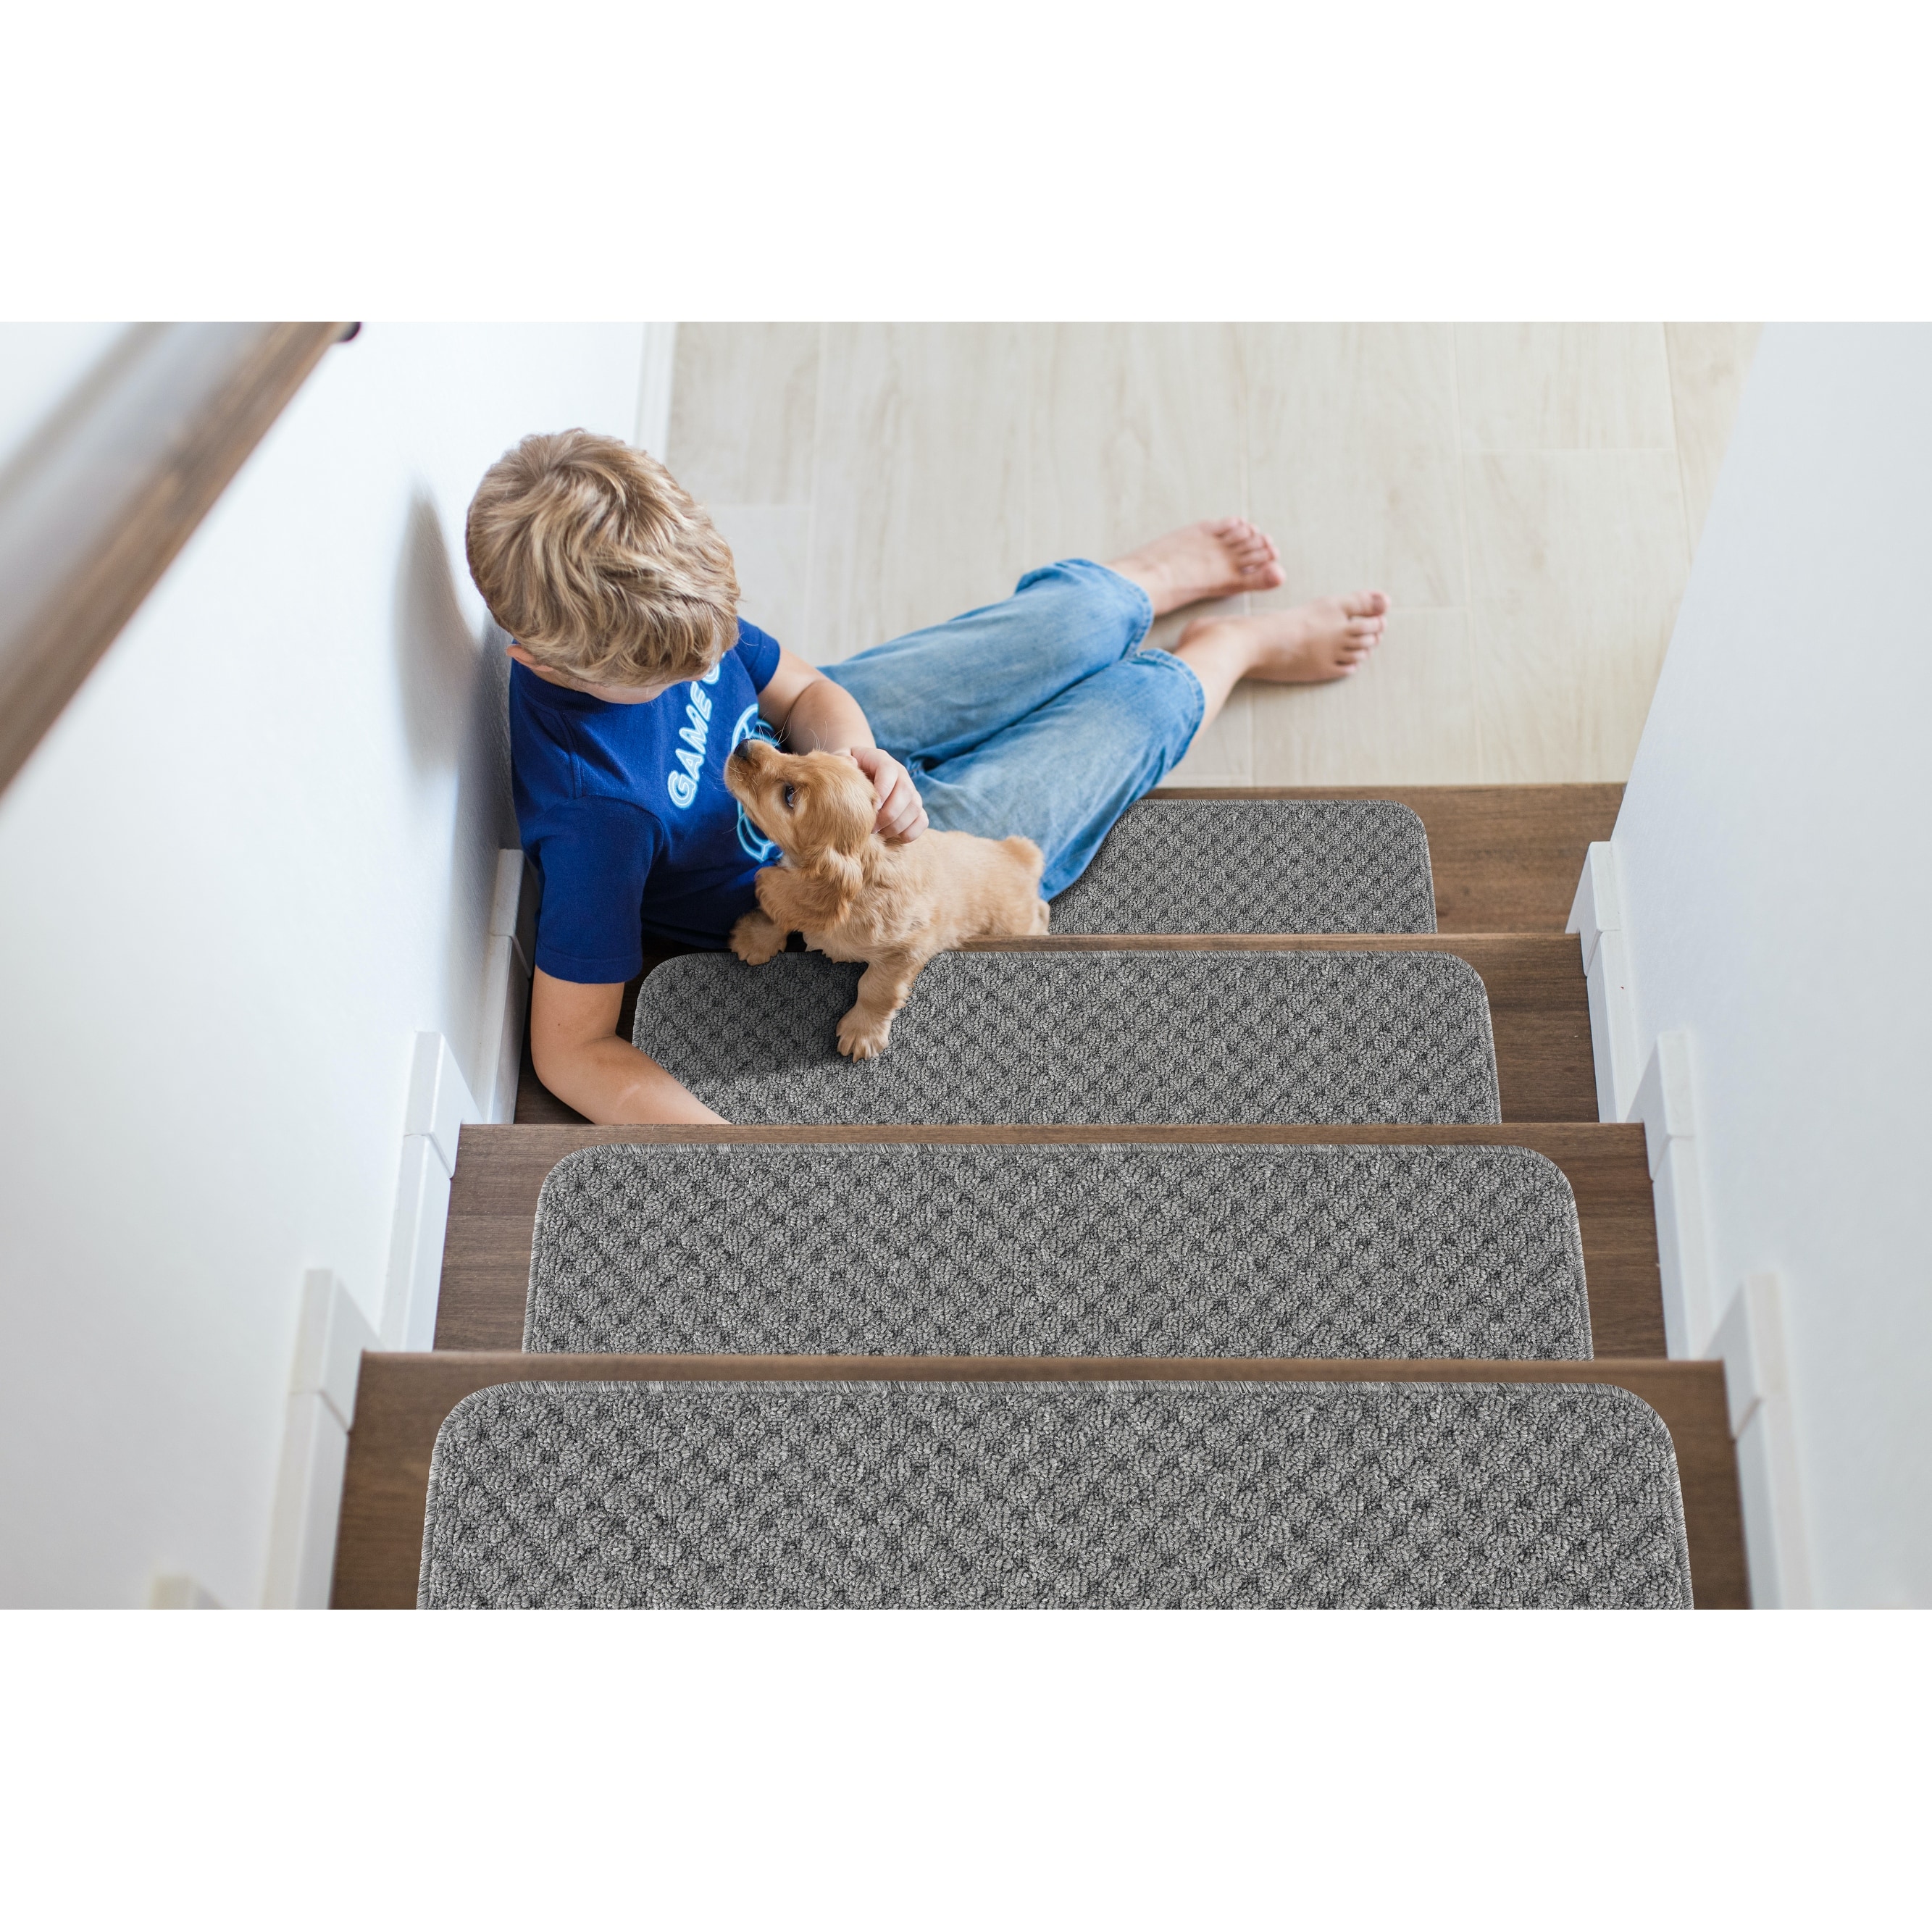 Set of 14 Non Slip Carpet Stair Treads Rugs for Stairs FLORAL 8.5" x 26" 